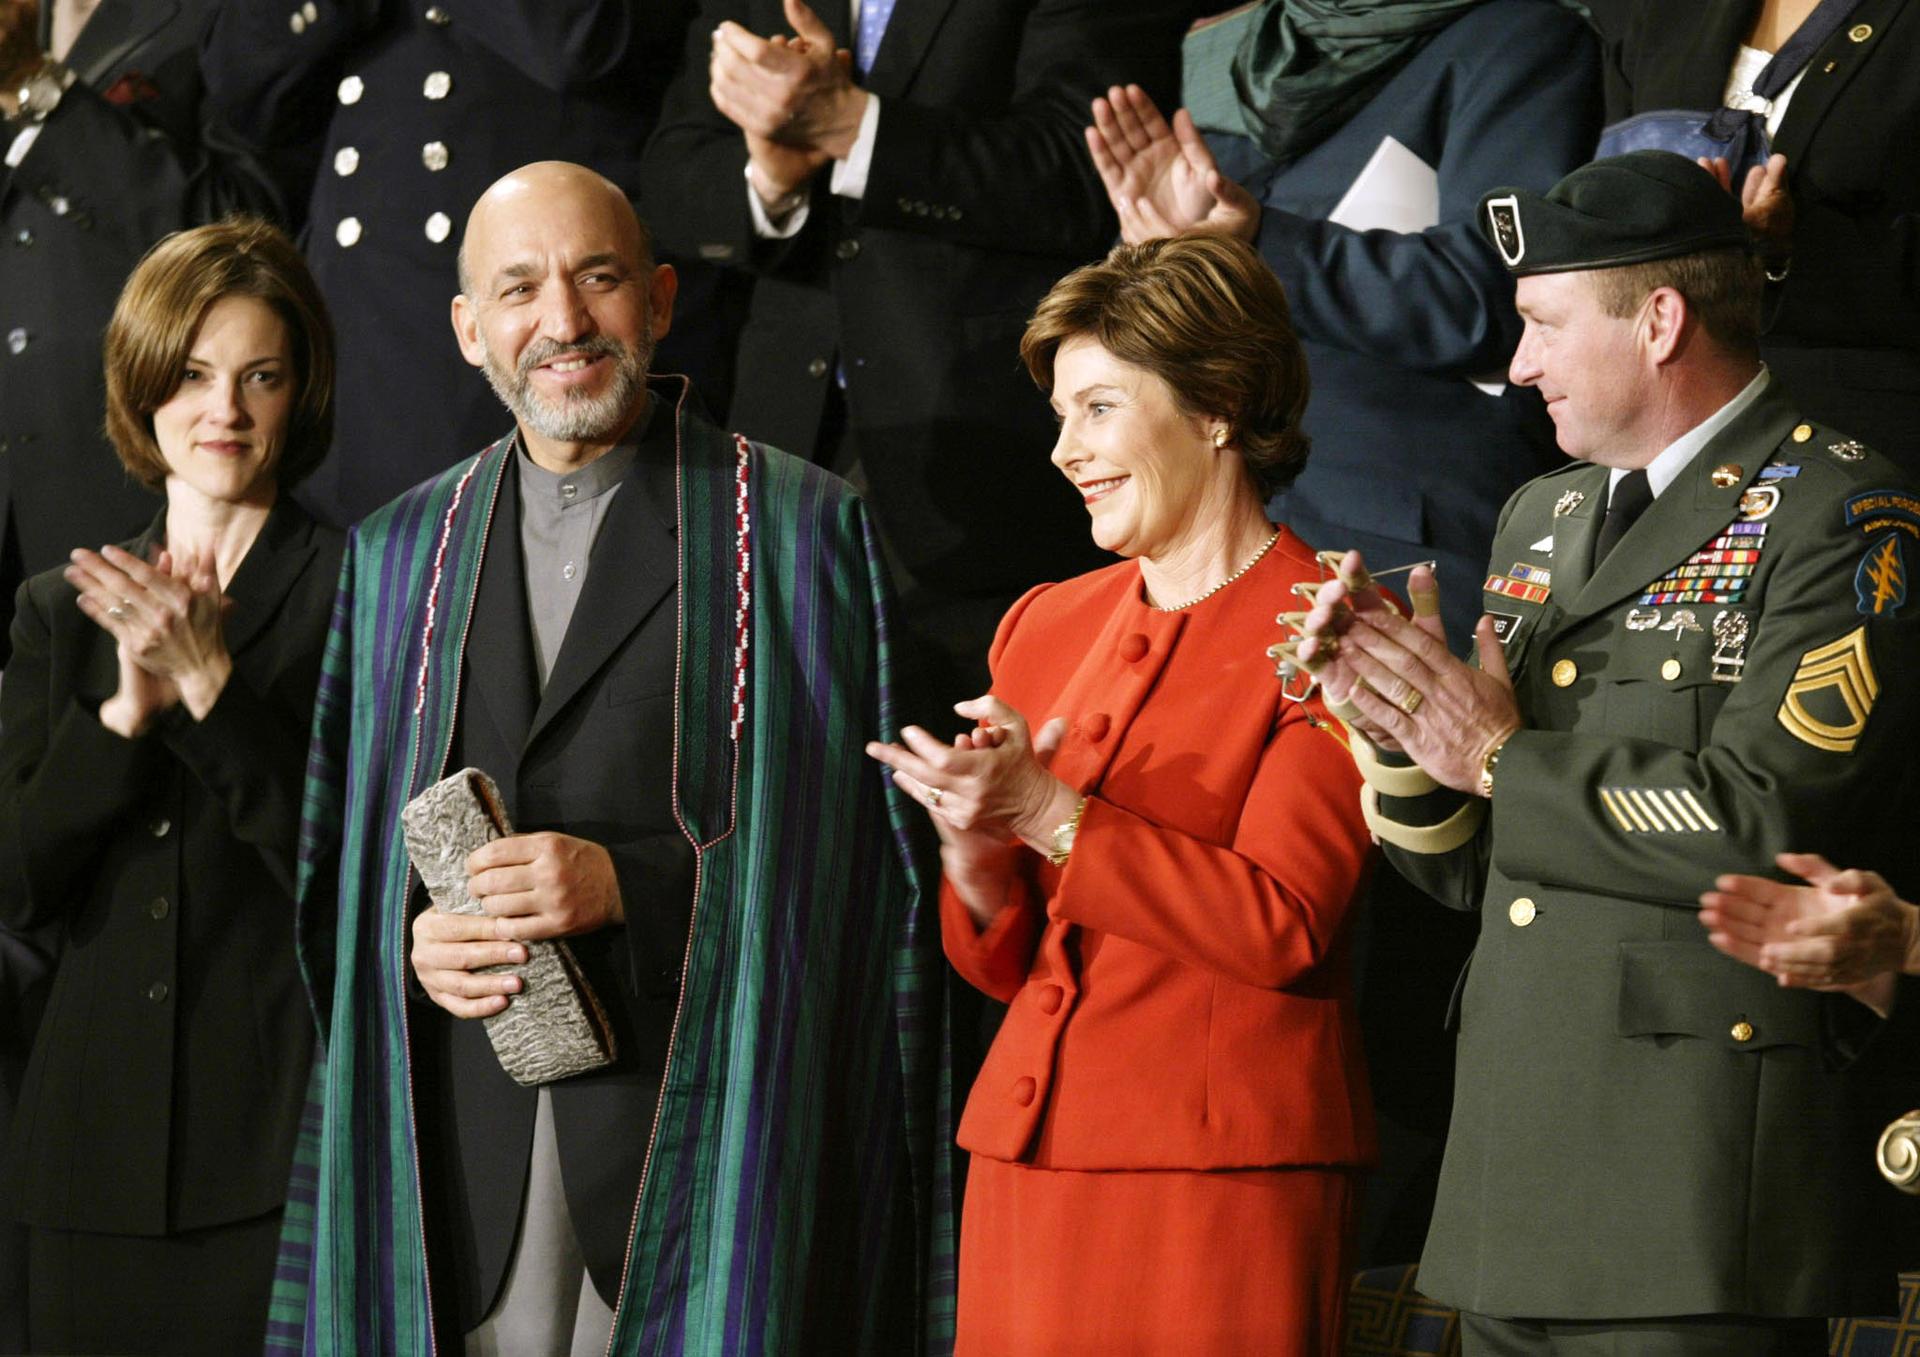 Afghan President Hamid Karzai attending the 2002 State of the Union address